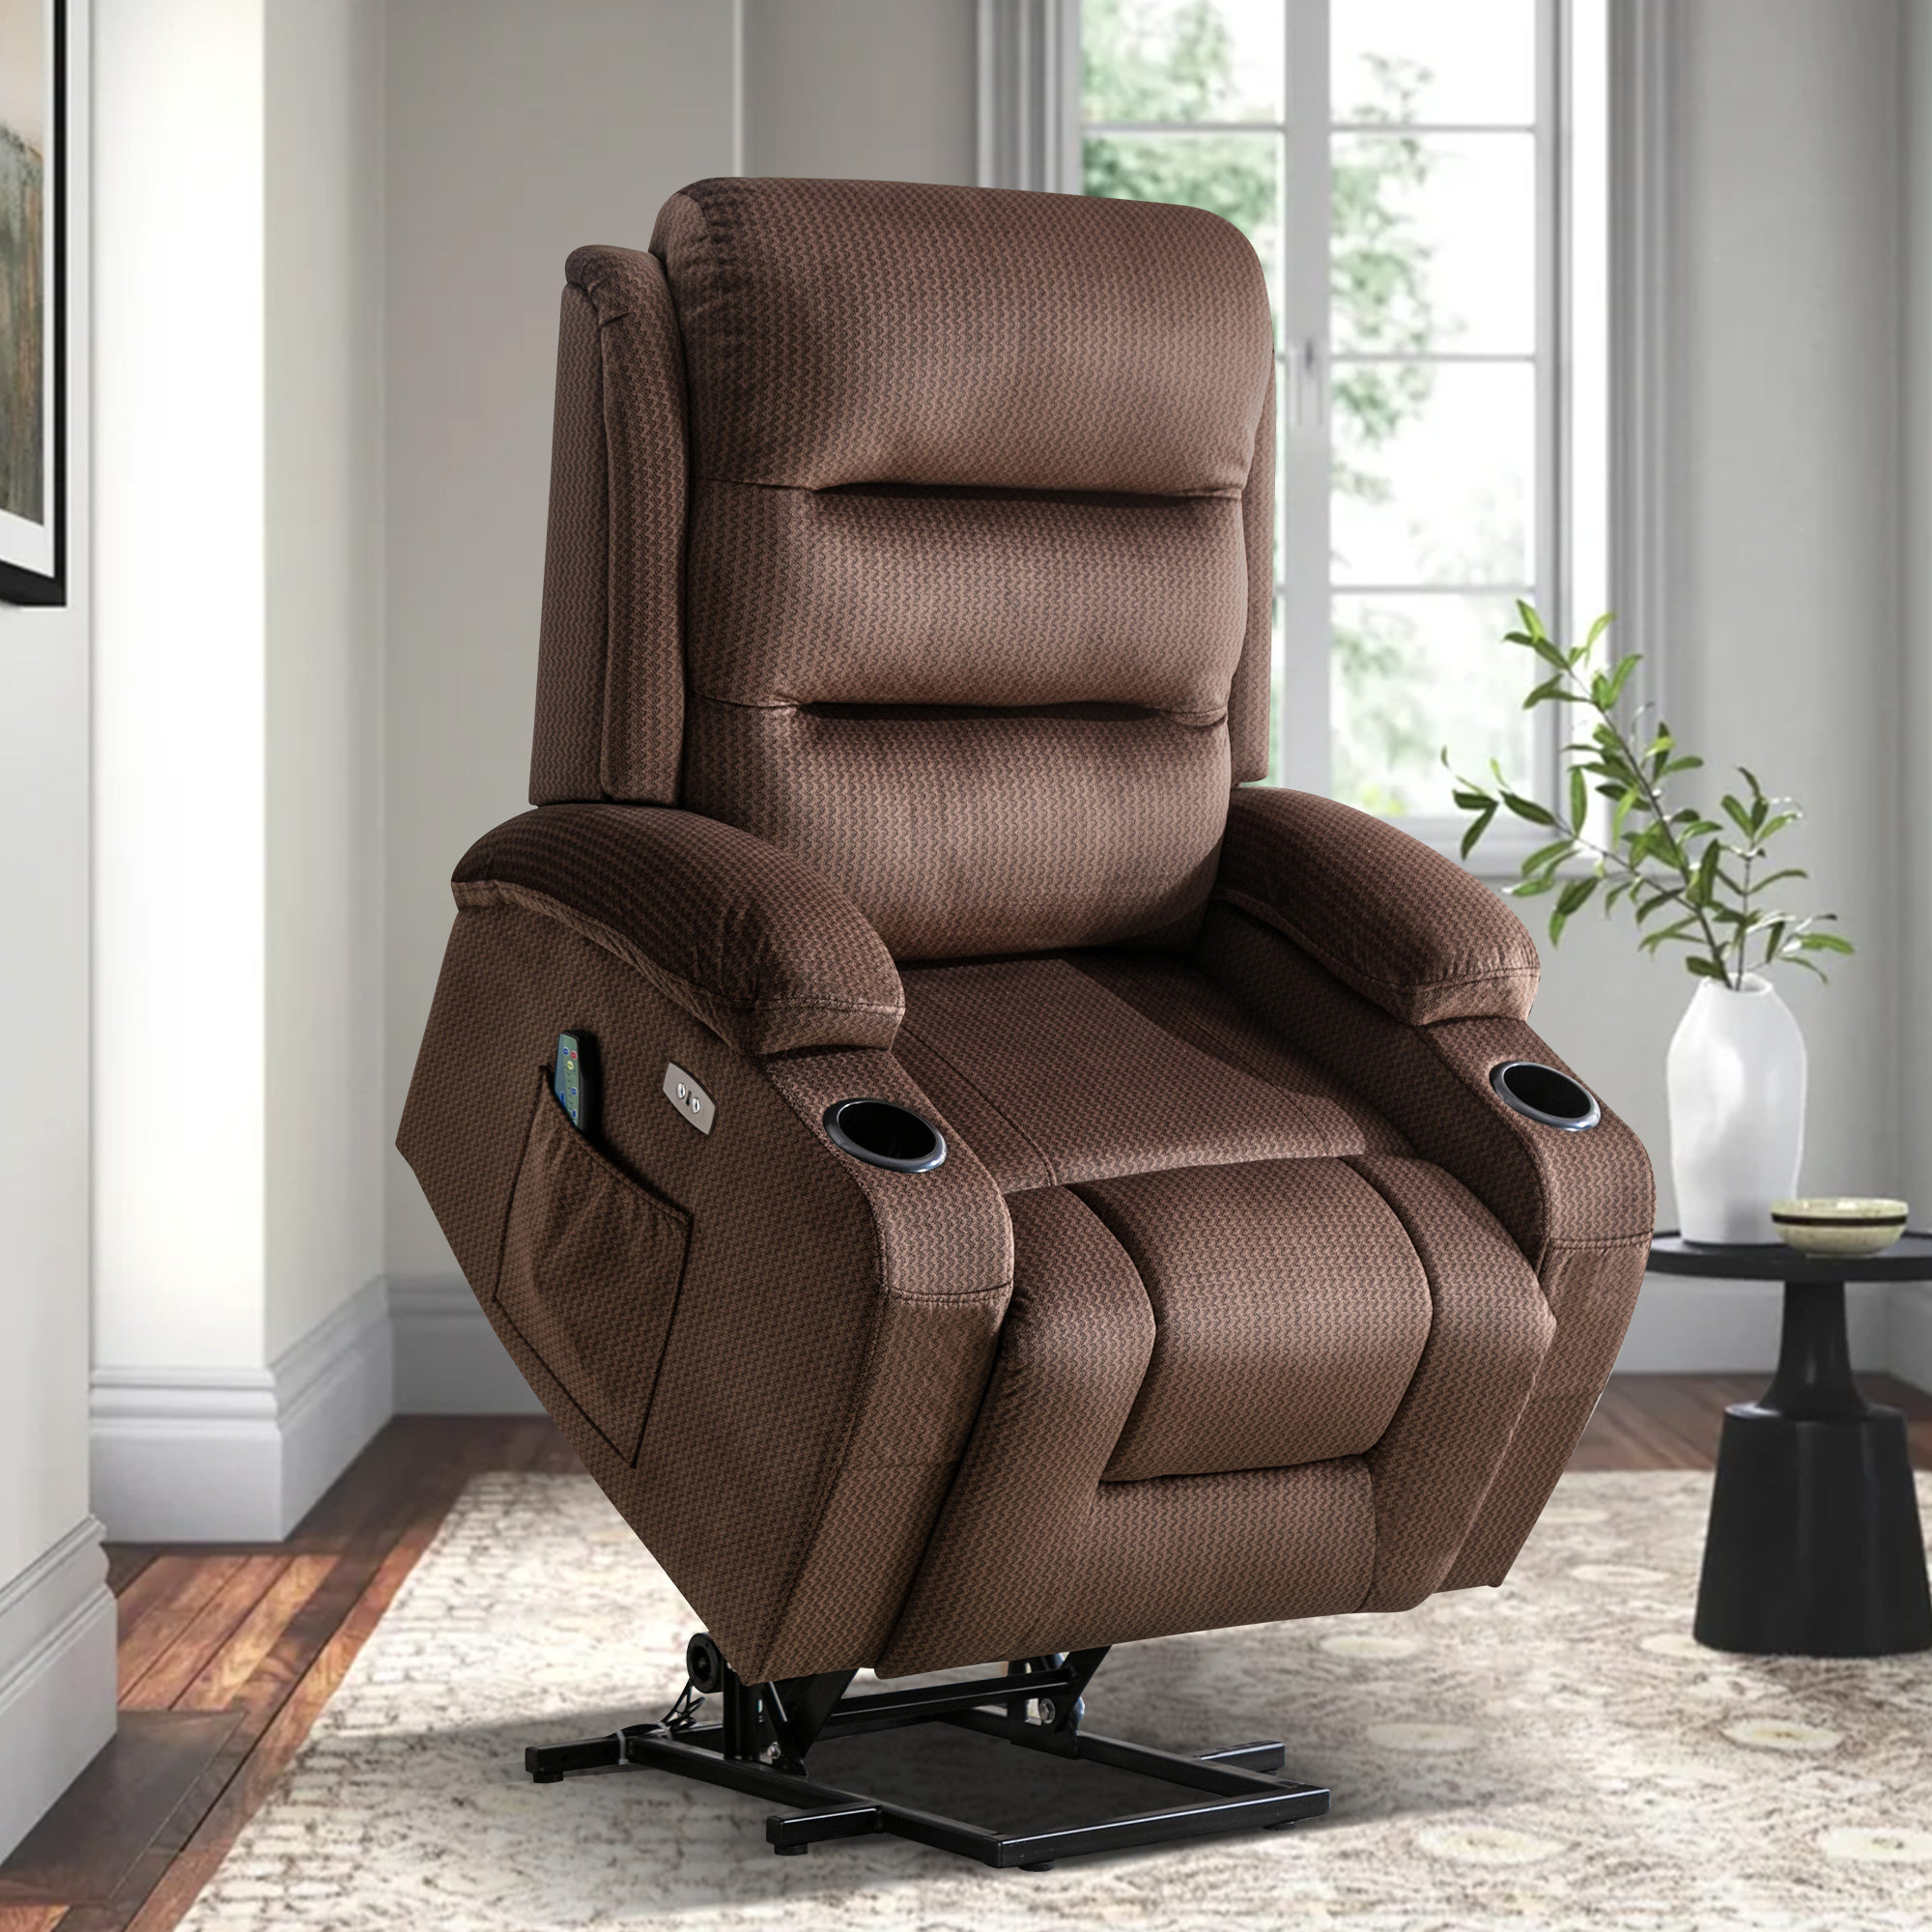 Upholstered Heated Massage Chair